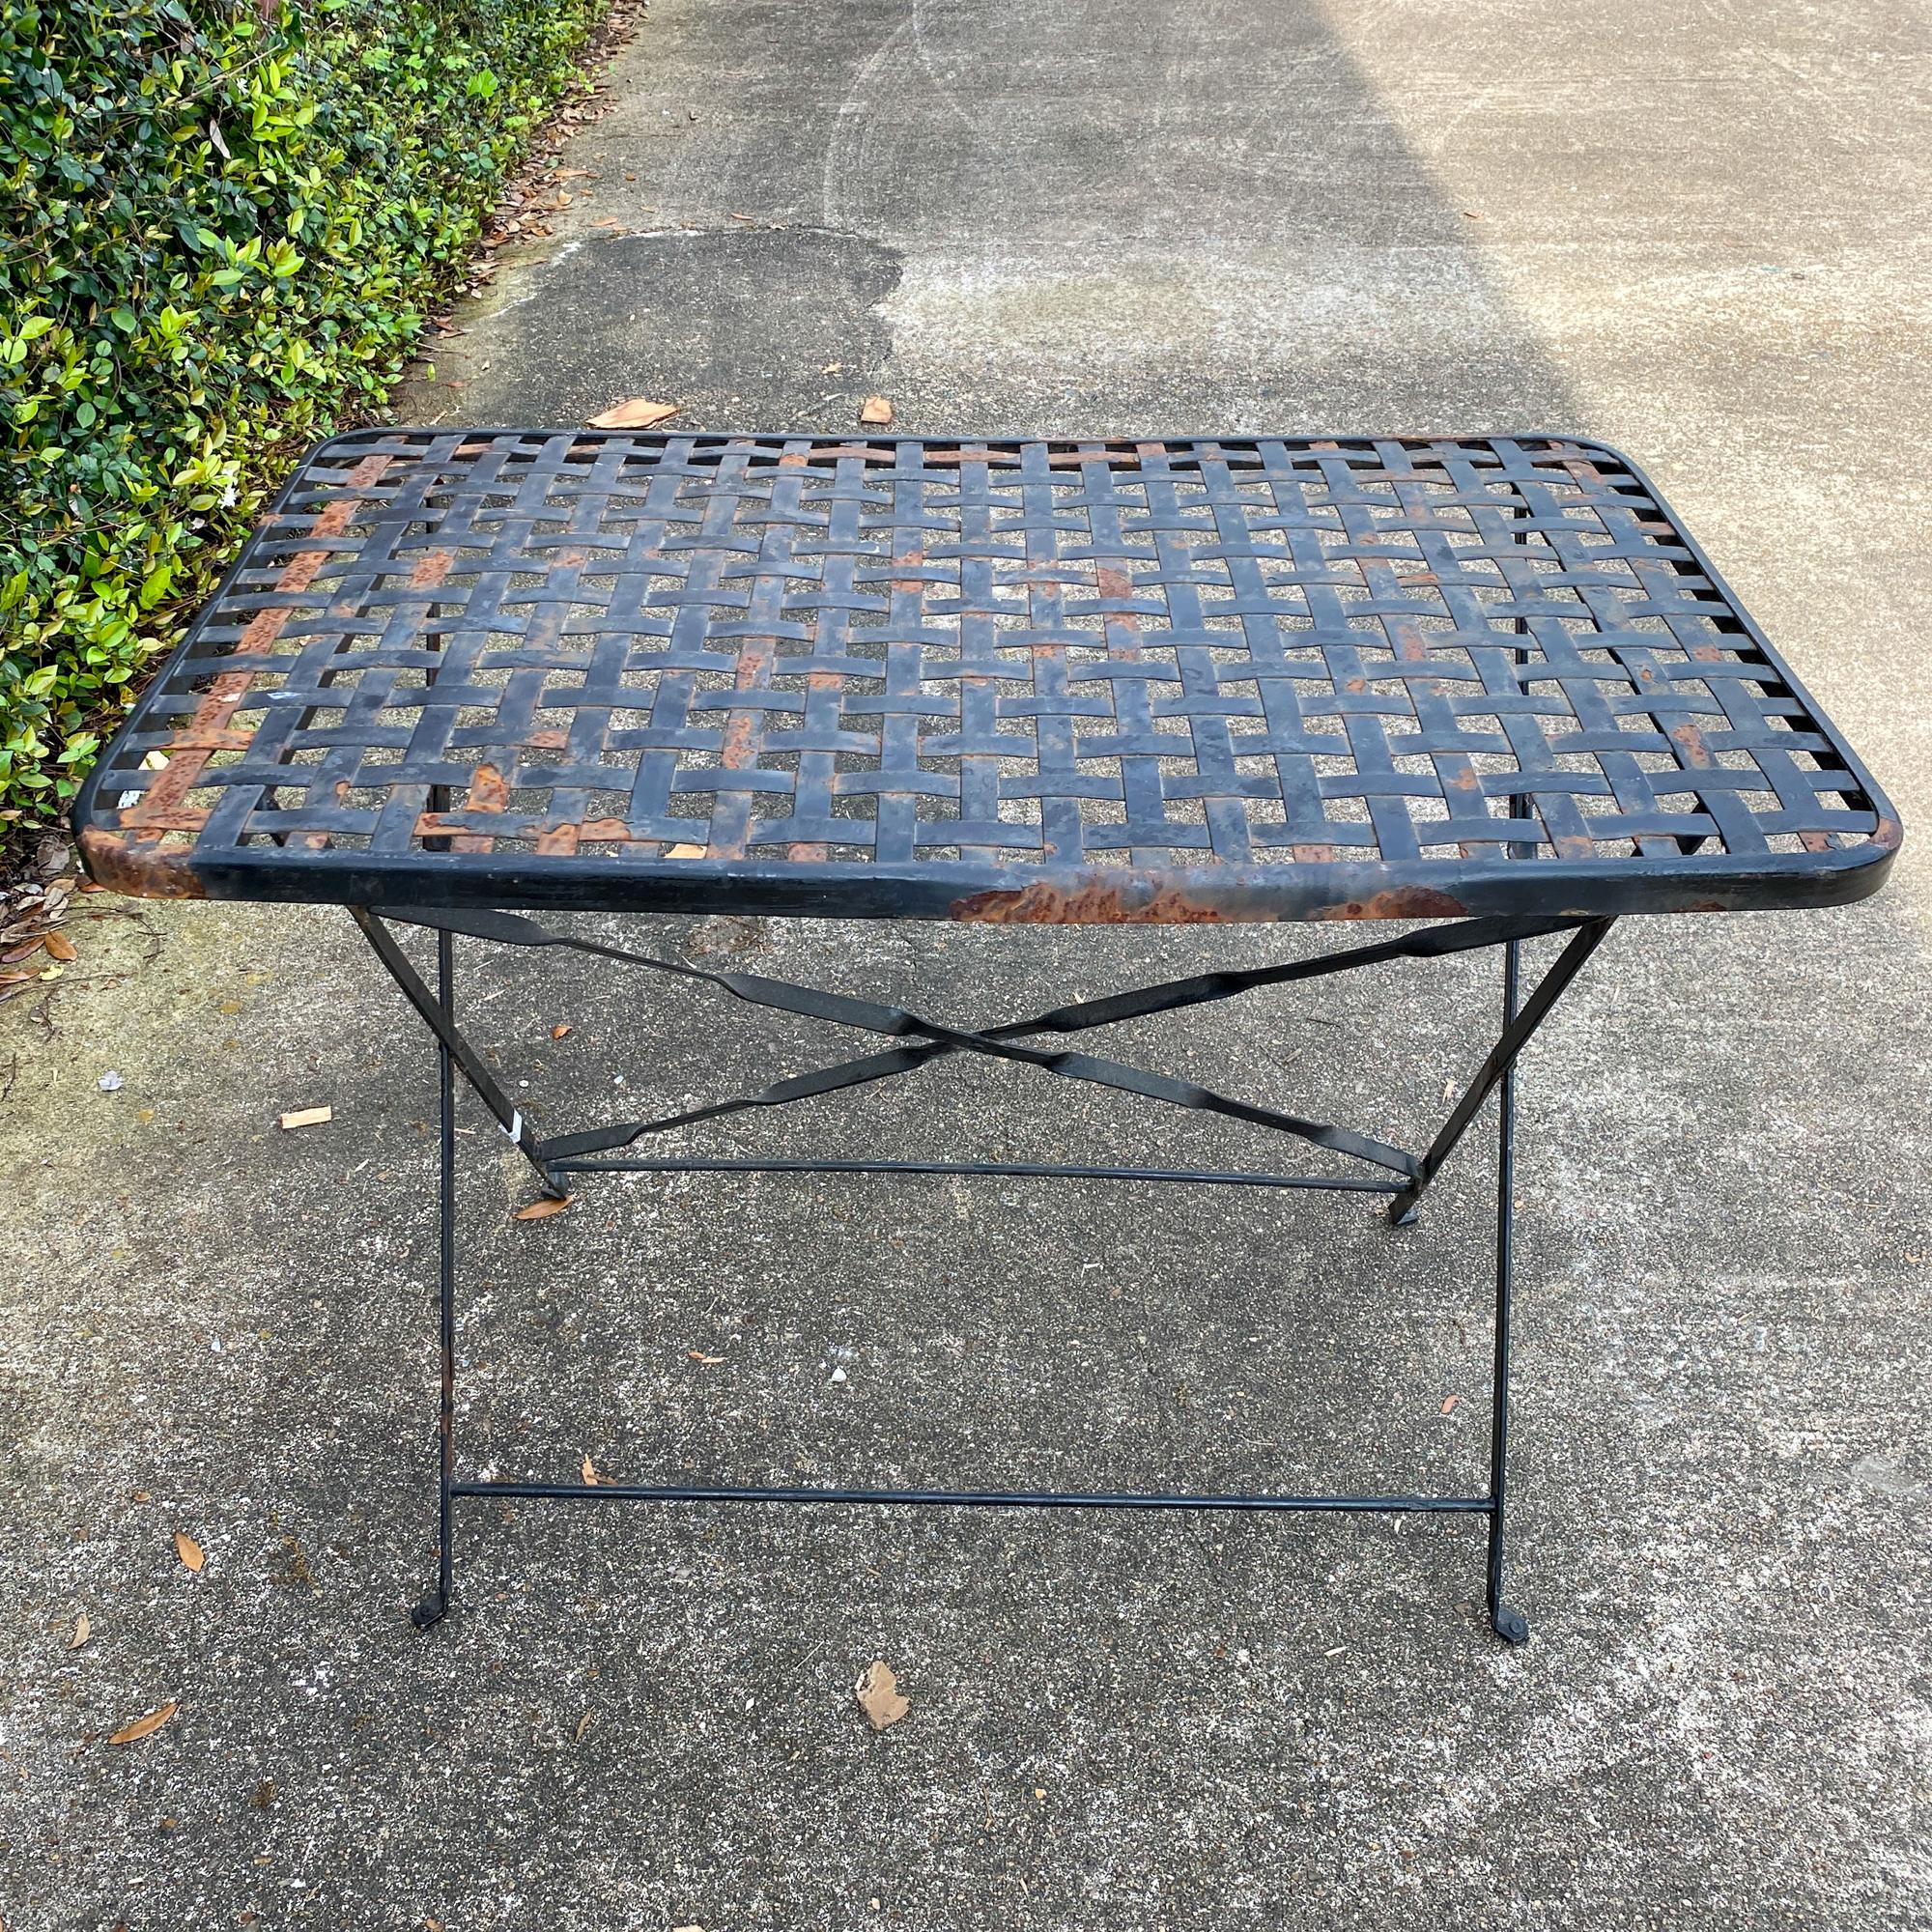 This is a 1940s wrought iron folding table sourced in France. The top has a woven look and the corners are rounded, with a beautiful patina. The legs are sturdy and feature a locking mechanism for stability. The legs also have a decorative twist in